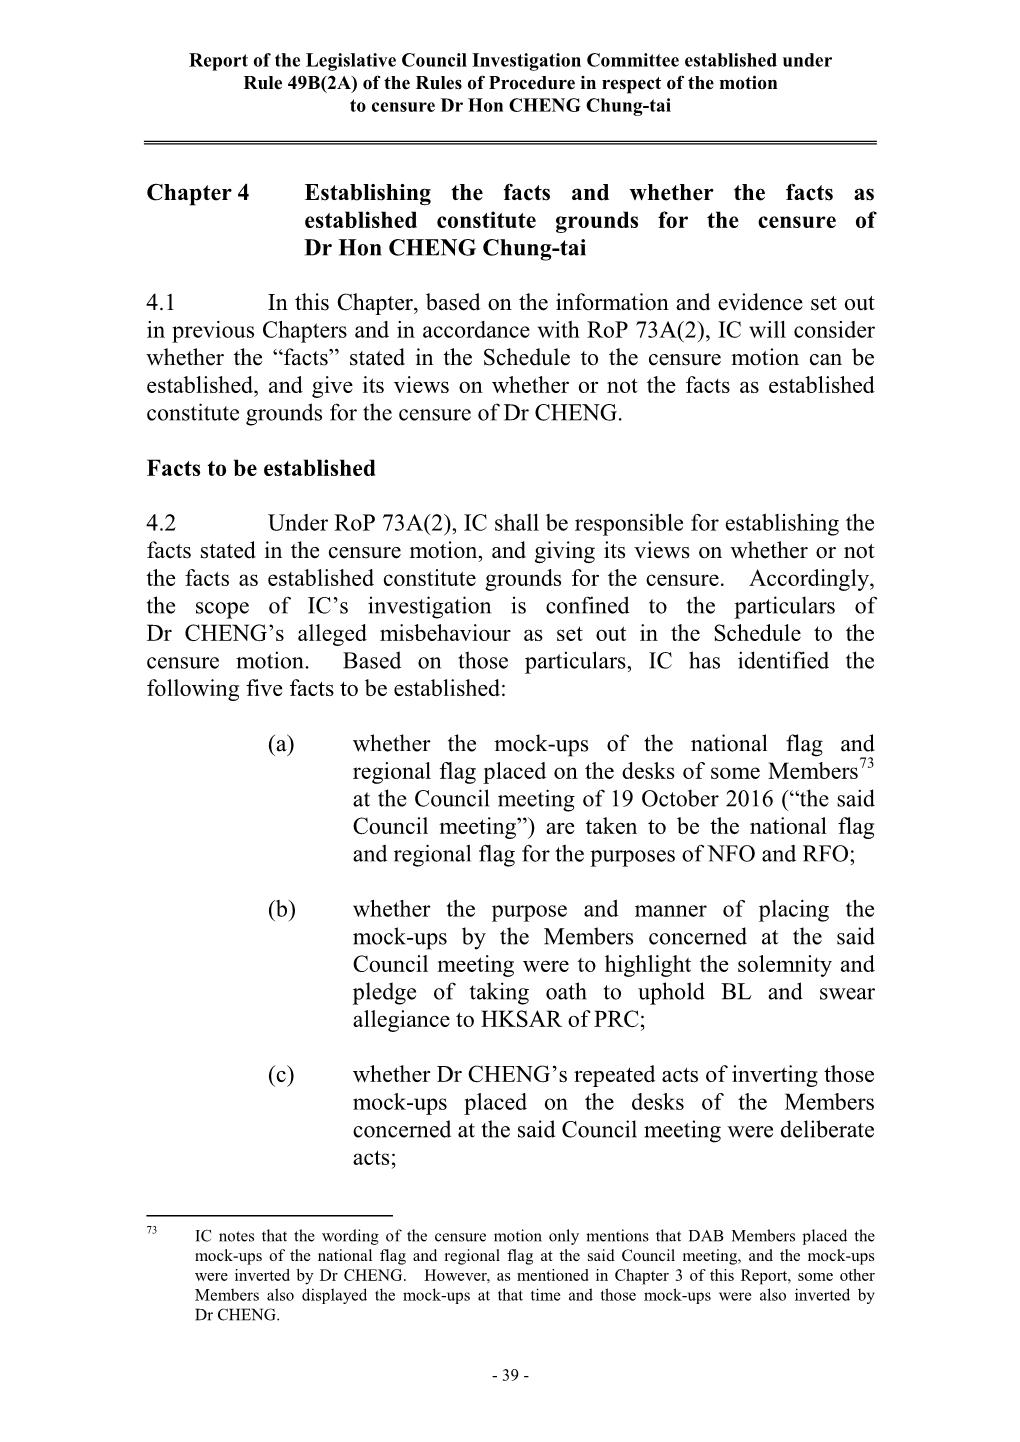 Of the Rules of Procedure in Respect of the Motion to Censure Dr Hon CHENG Chung-Tai